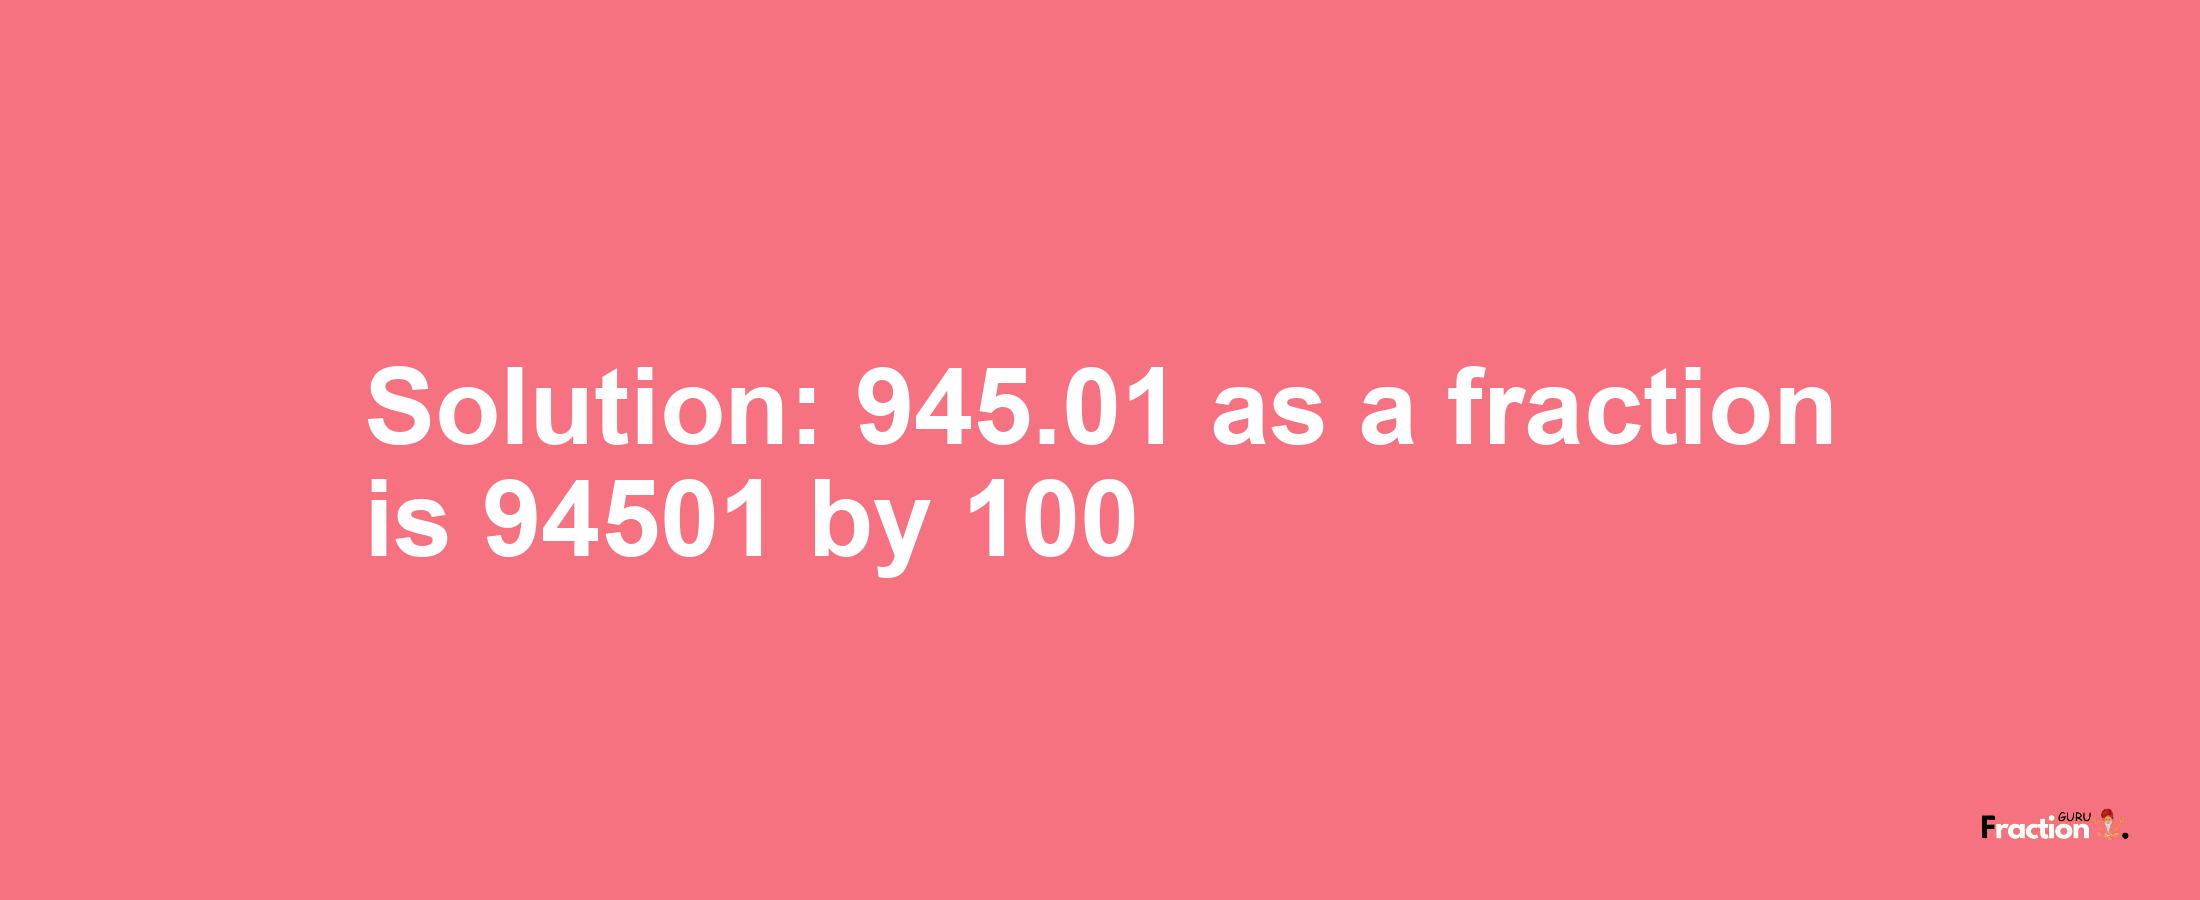 Solution:945.01 as a fraction is 94501/100